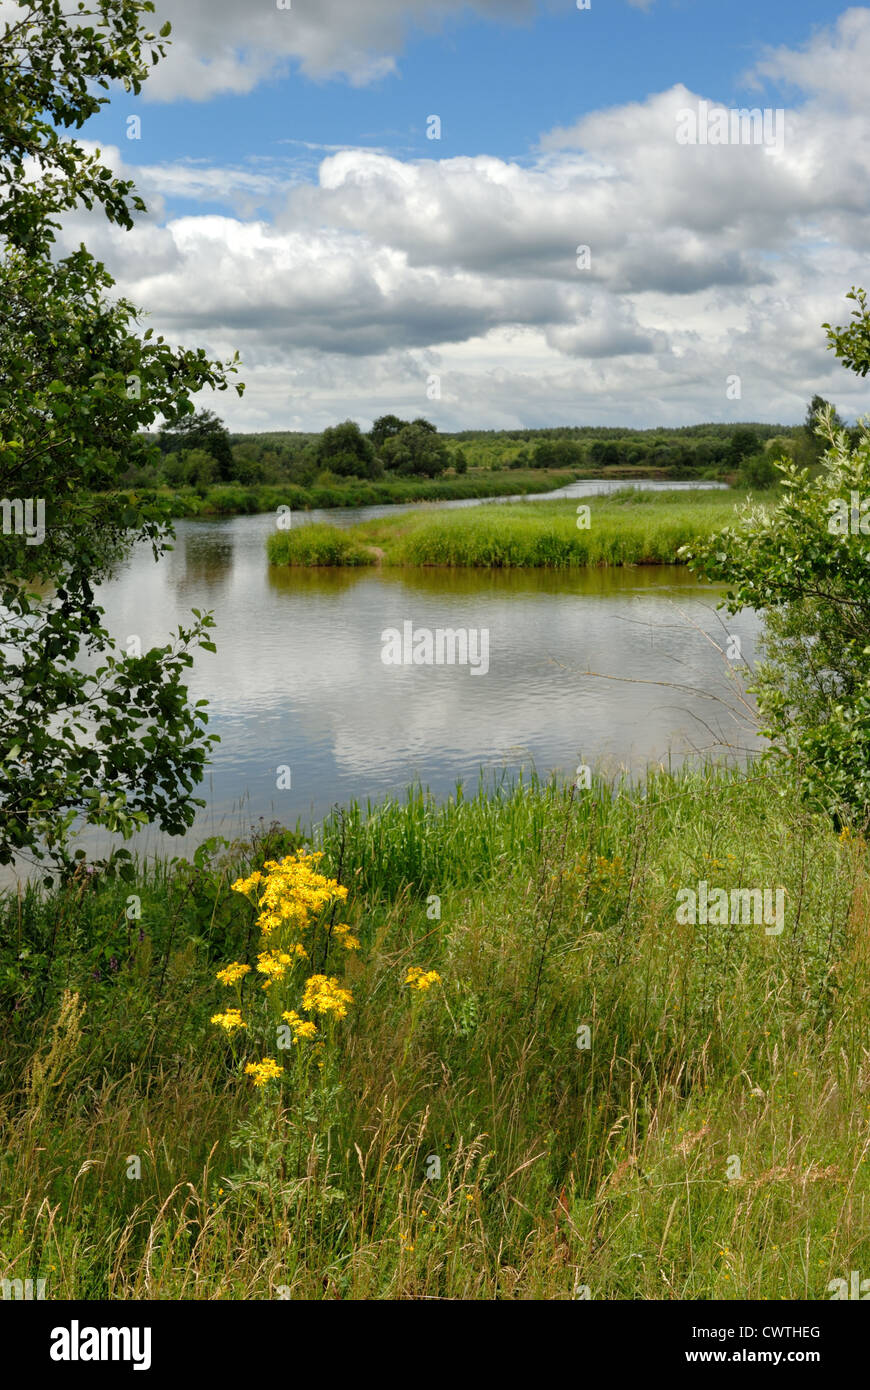 The river with island, a grass on coast, clouds in the sky and their reflexion in water. Stock Photo